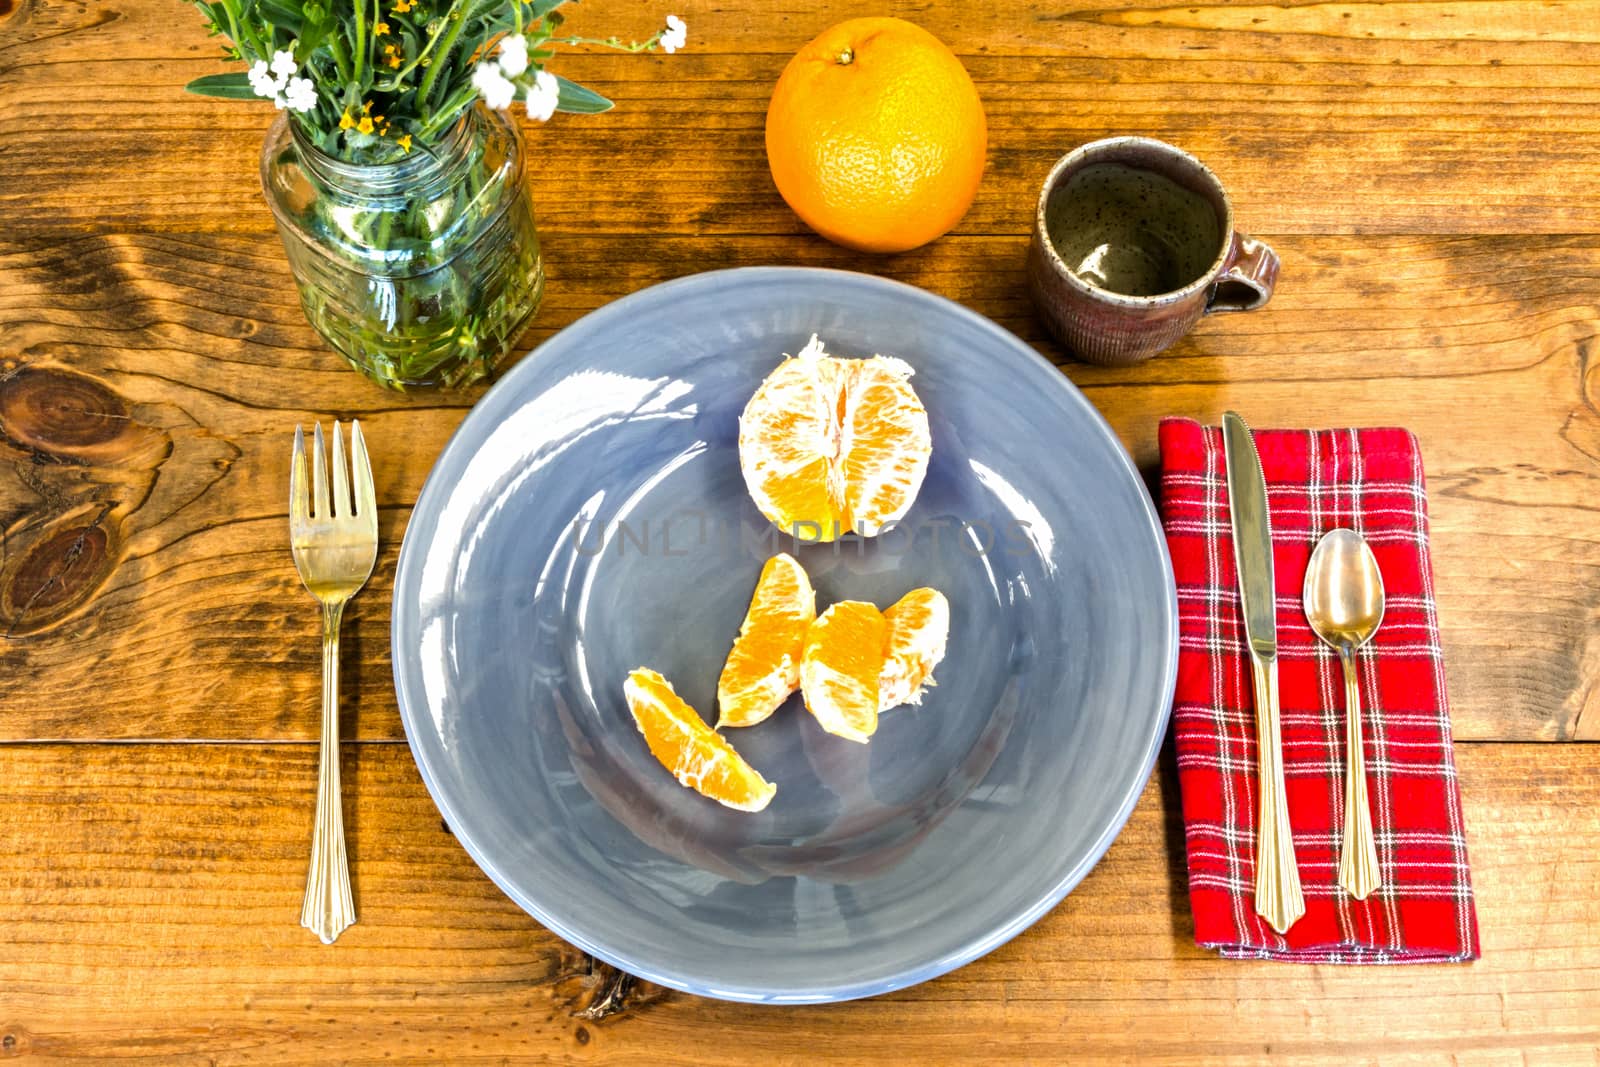 Place Setting With Orange Peels and Brown Cup on Wooden Table With Knots